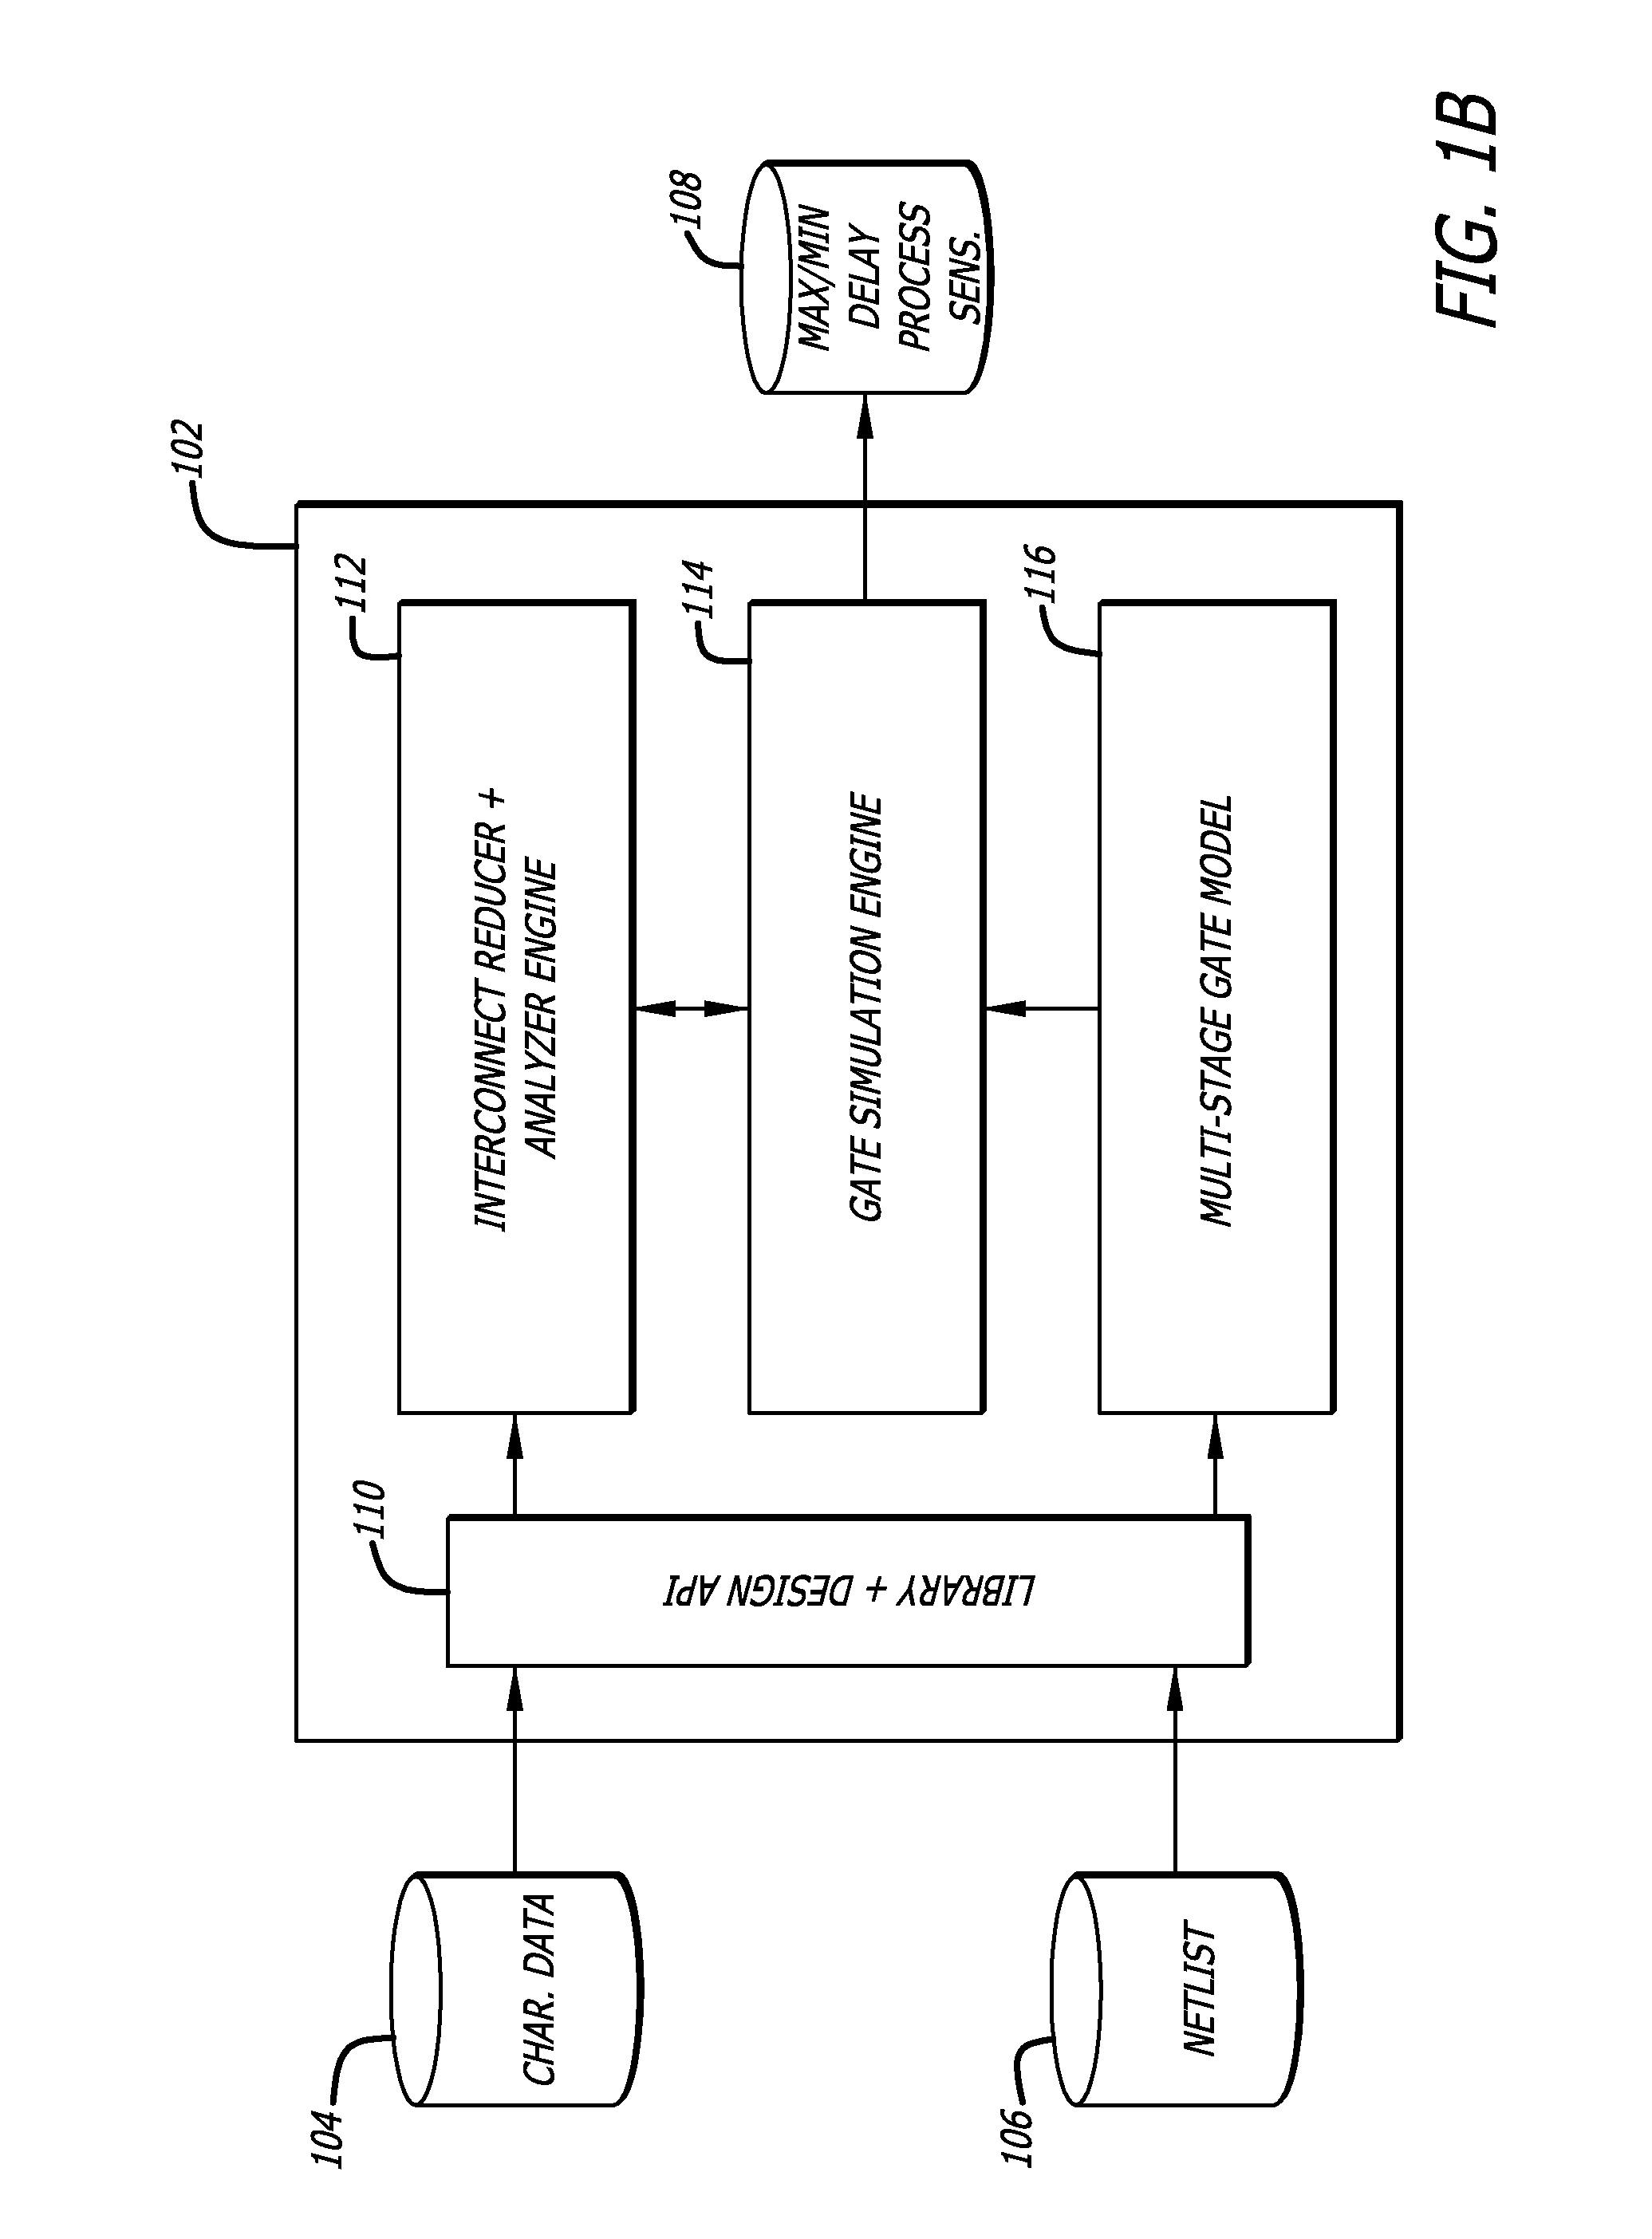 Sensitivity and static timing analysis for integrated circuit designs using a multi-CCC current source model